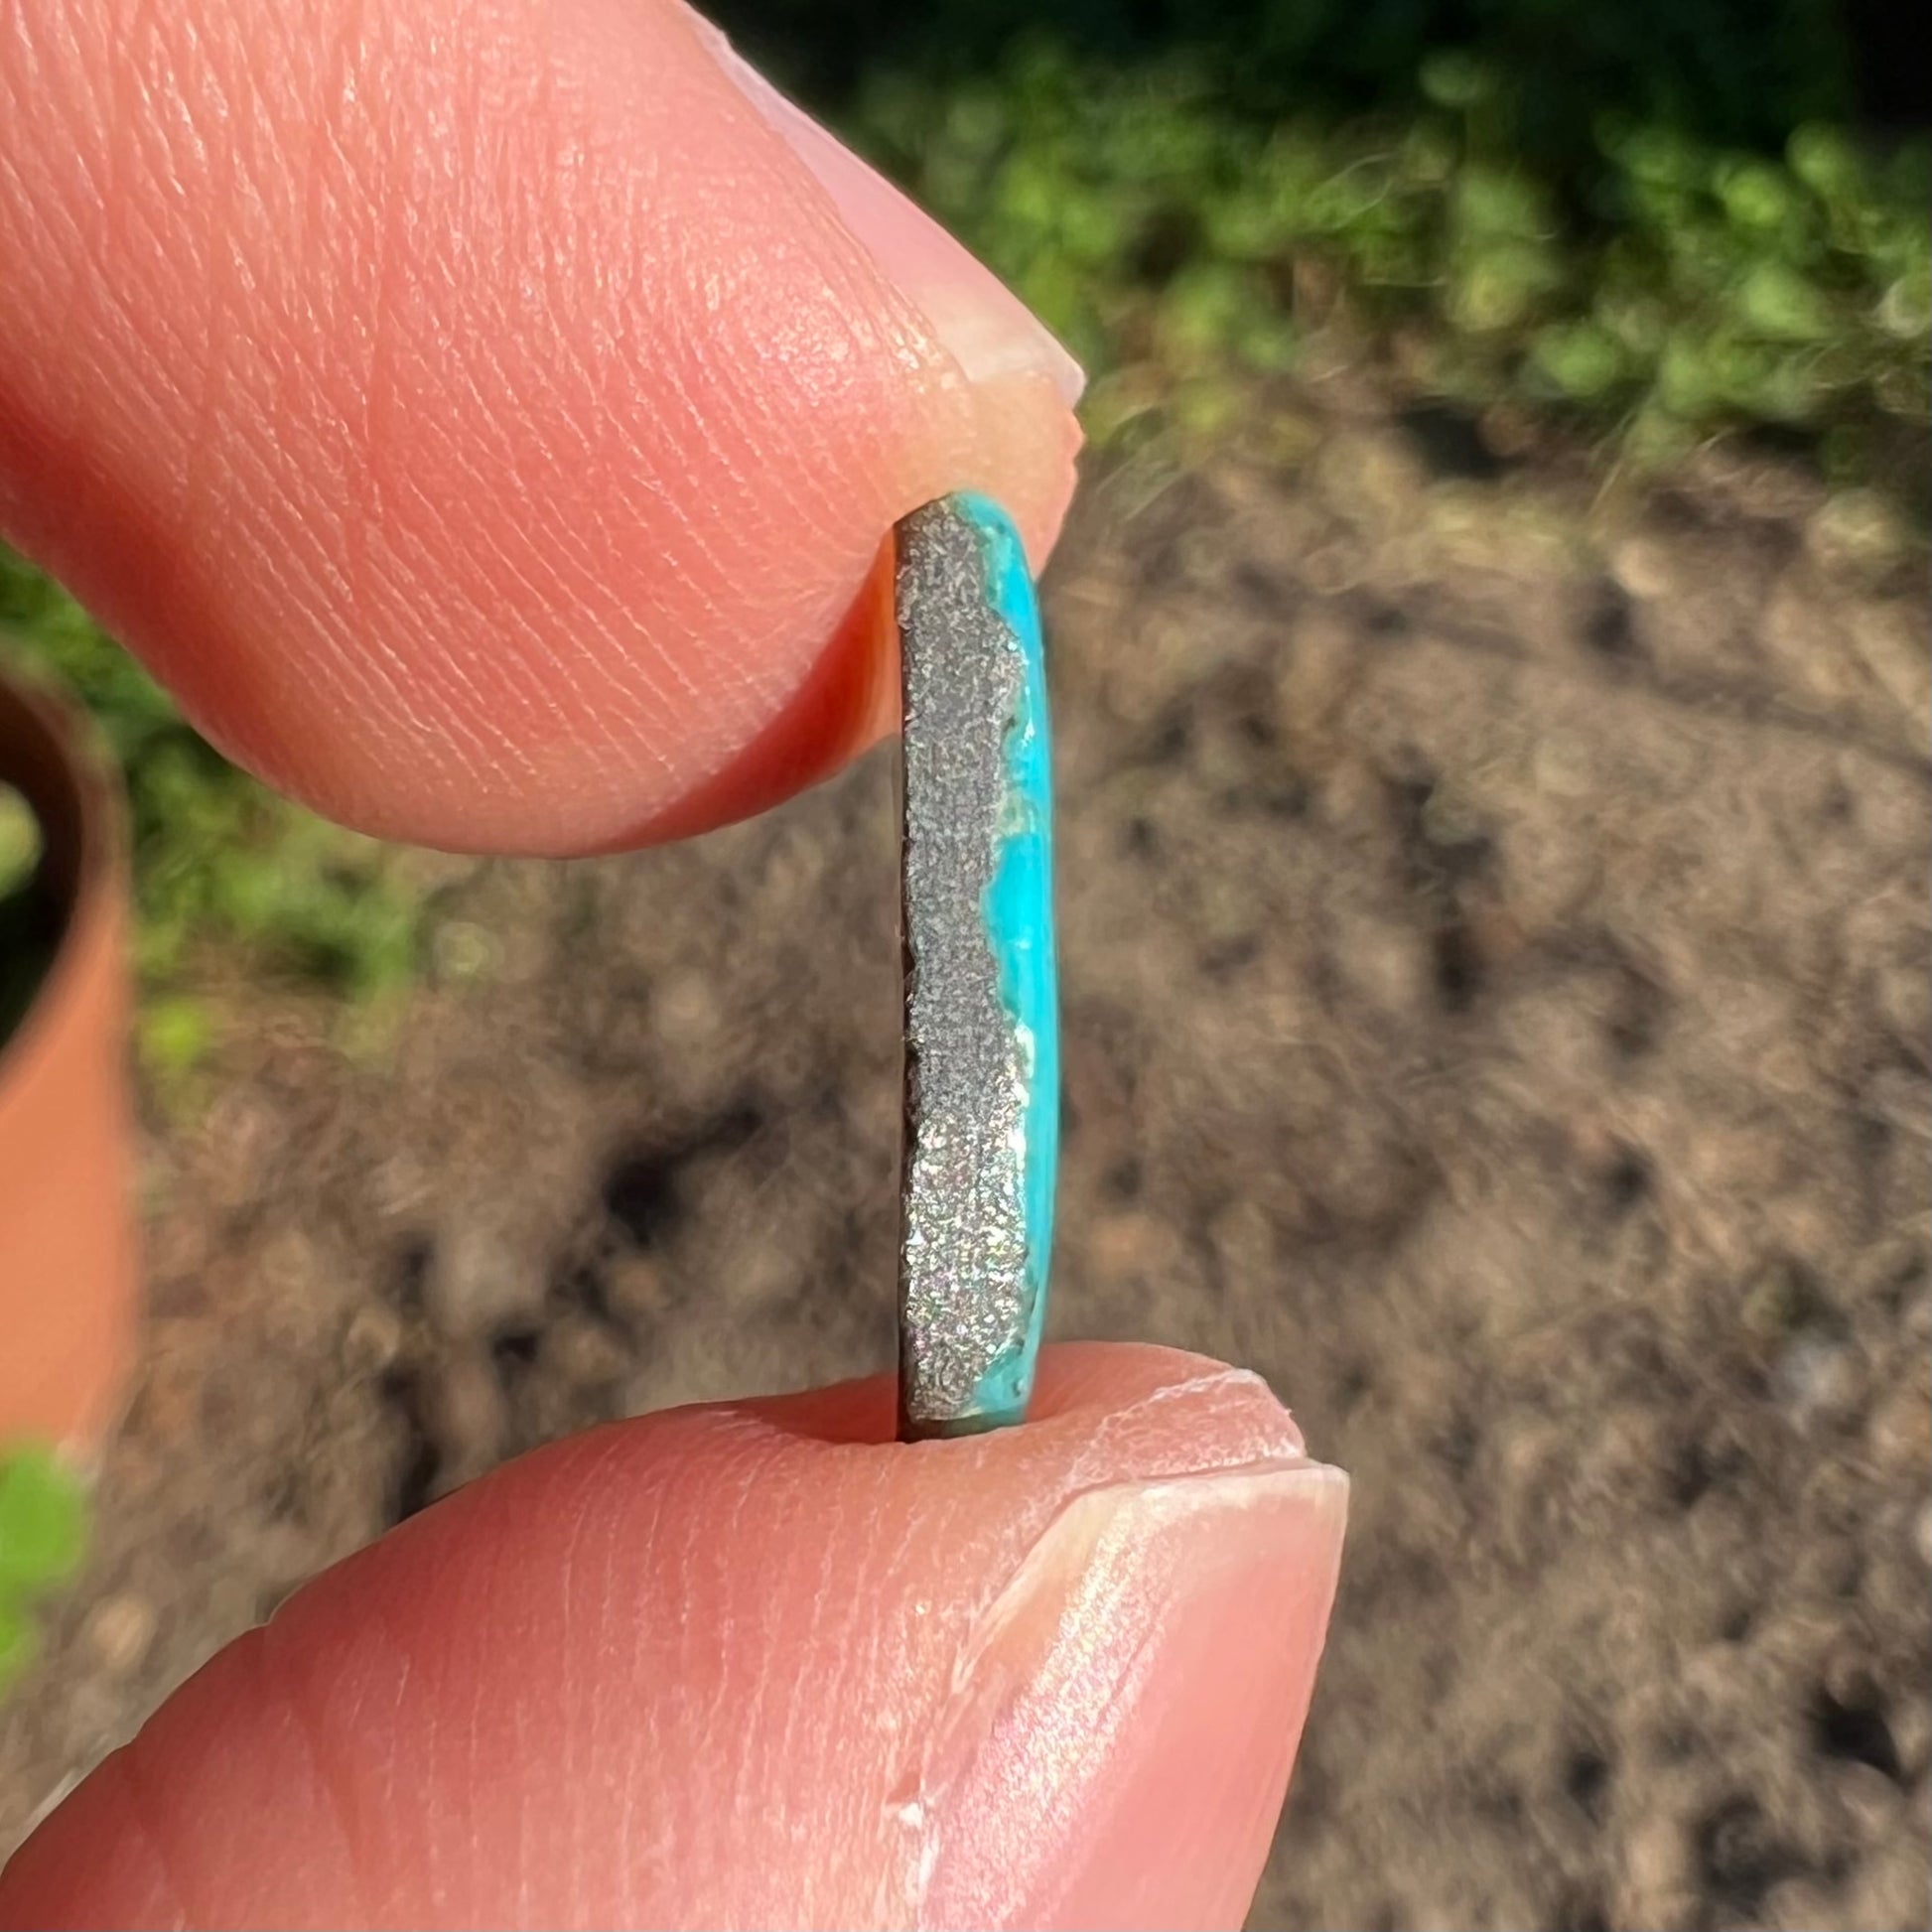 A loose, freeform cabochon cut Kingman turquoise stone.  The stone is bright blue.